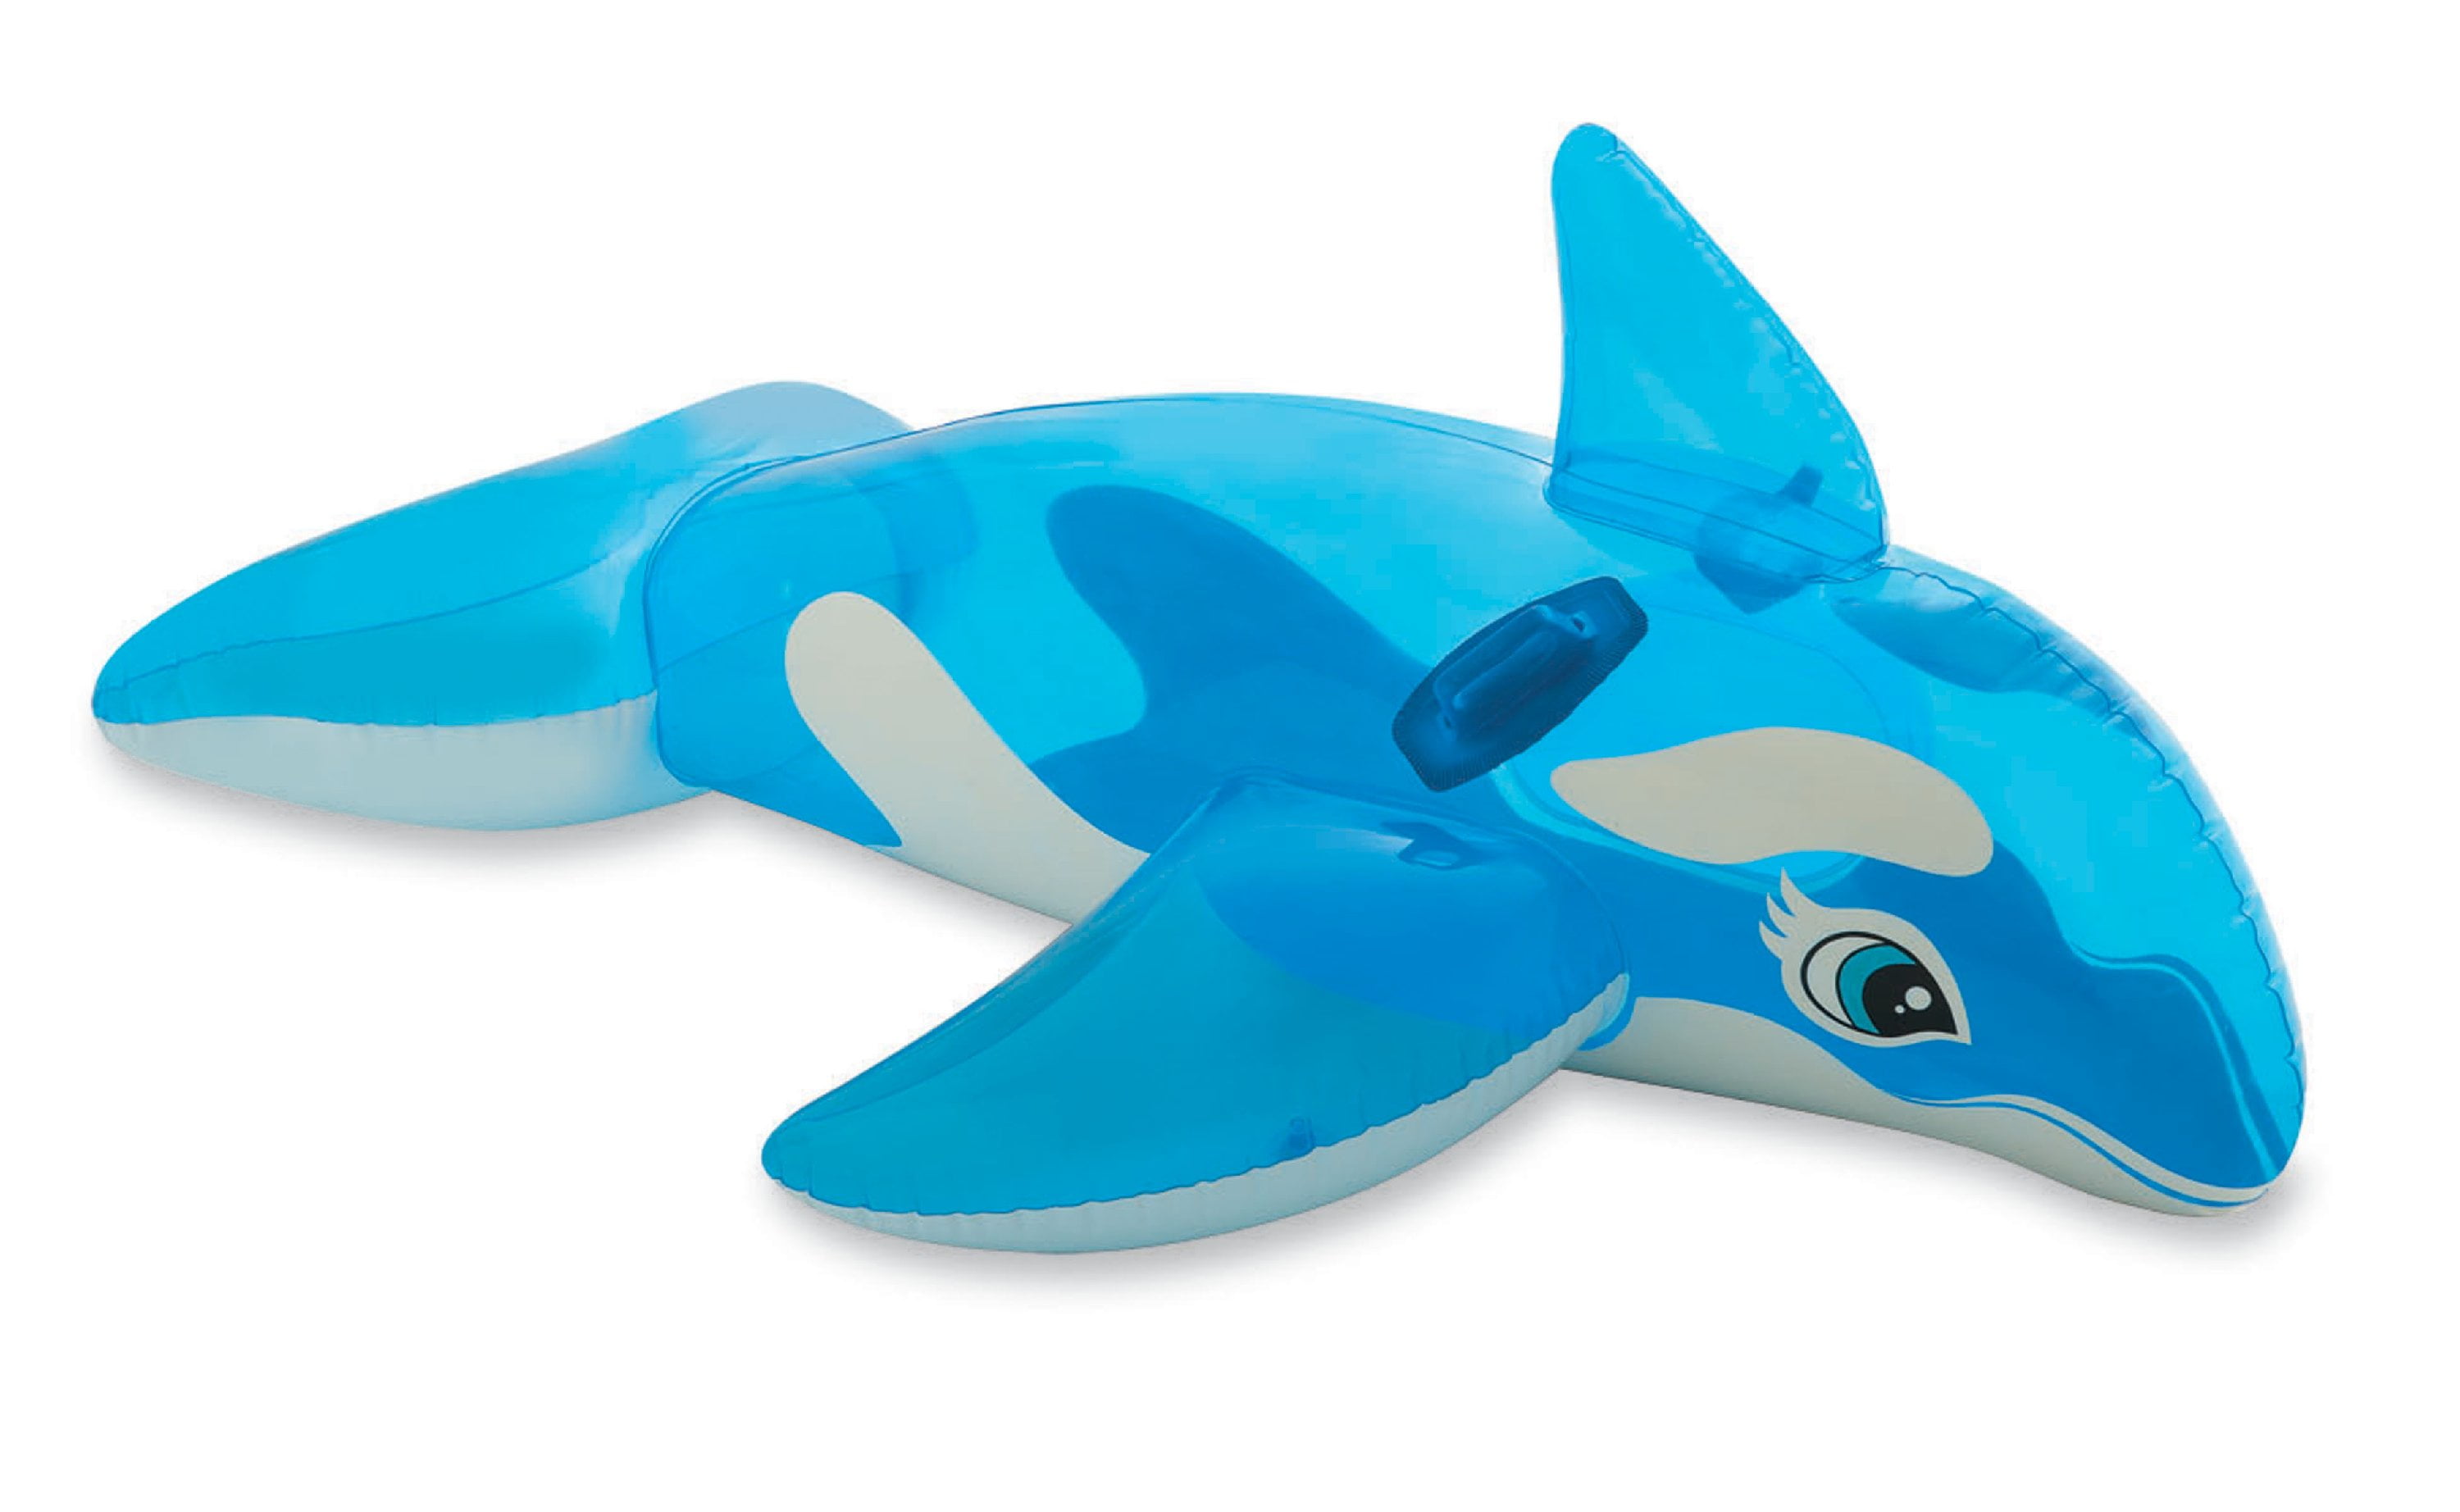 Intex 58539np Large Inflatable Dolphin Ride on Pool Toy 201cm X 76cm for sale online 